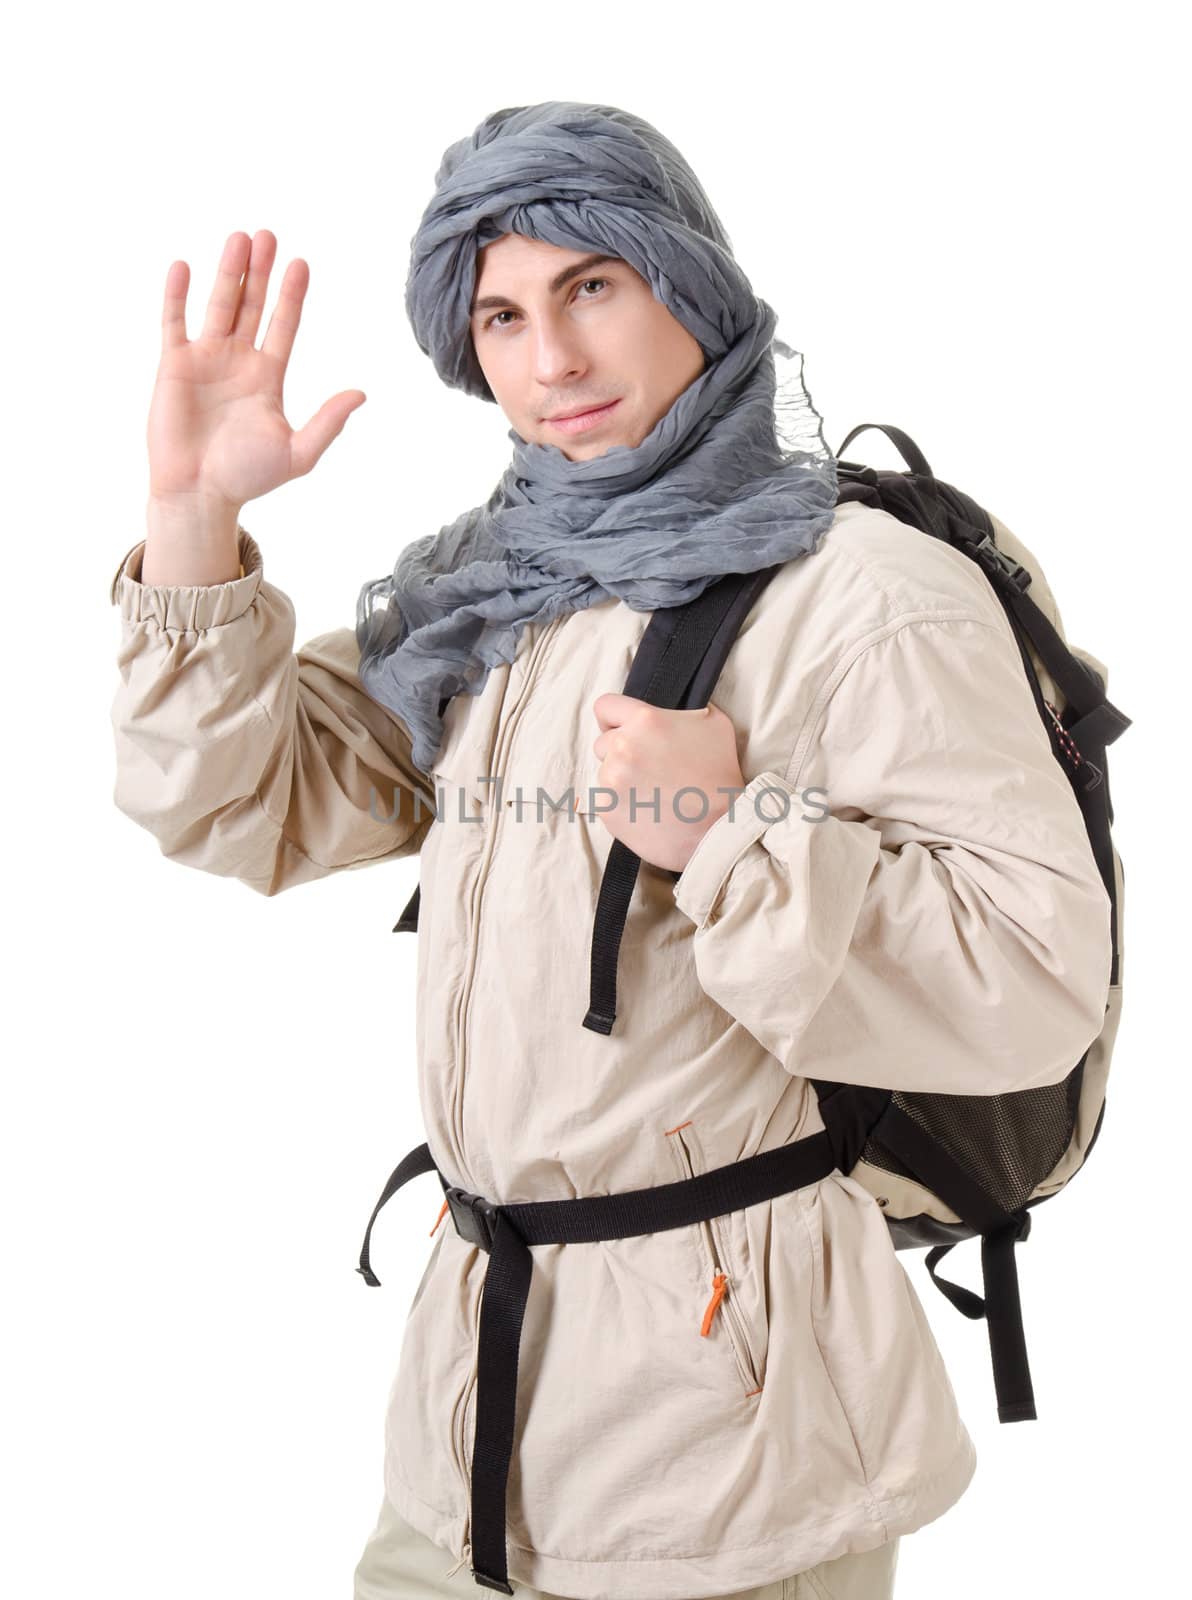 wildman - tourist with backpack on a white background